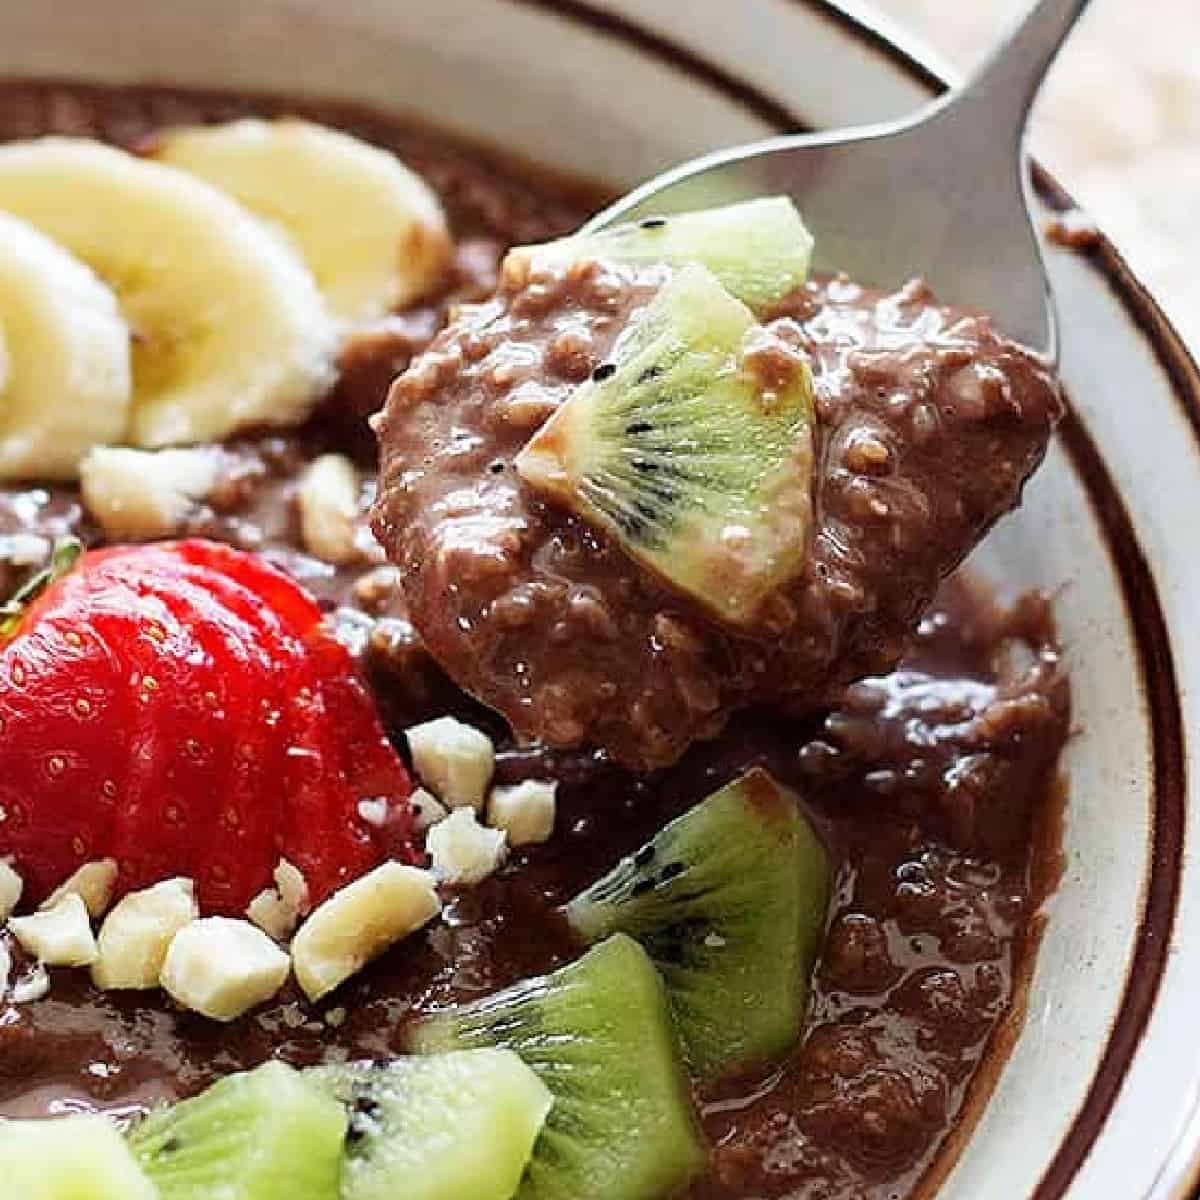 This Nutella Cocoa Oatmeal Bowl is perfect for breakfast, or any time that you crave something sweet and easy! Make it even better by adding some cocoa powder!
